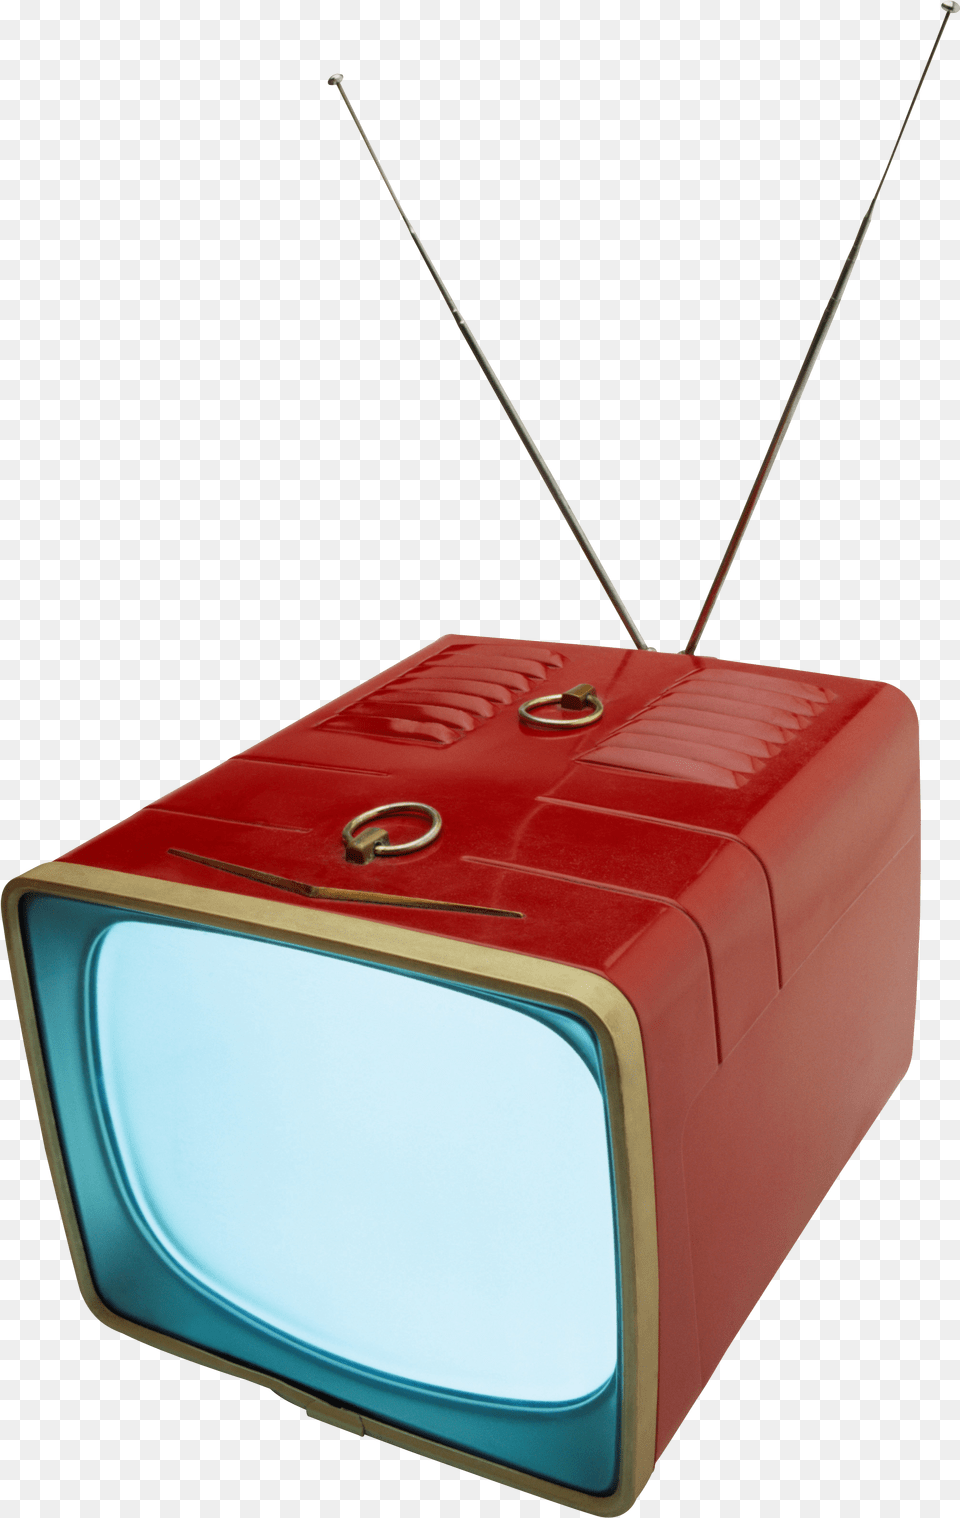 Retro Tv By Absurdwordpreferred On Small Screen By Brian L Ott, Computer Hardware, Electronics, Hardware, Monitor Png